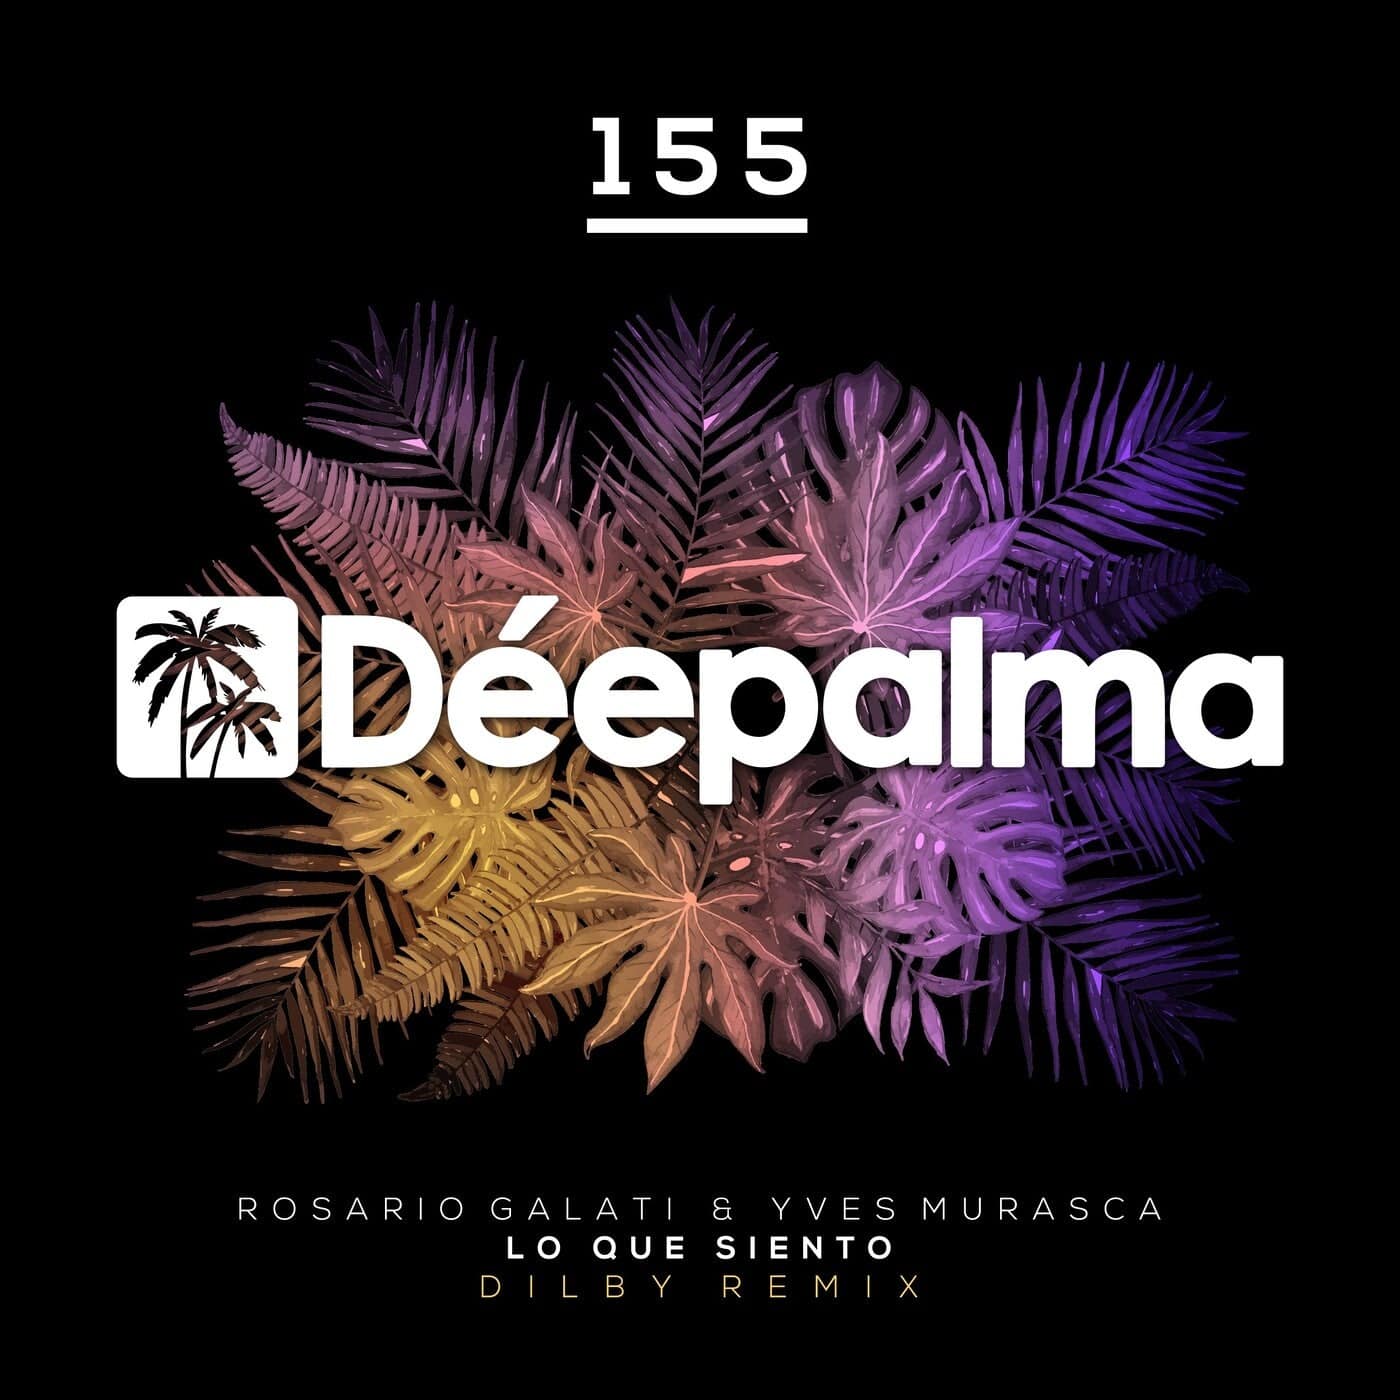 image cover: Yves Murasca, Rosario Galati - Lo Que Siento (Dilby Remix) / DPLM155